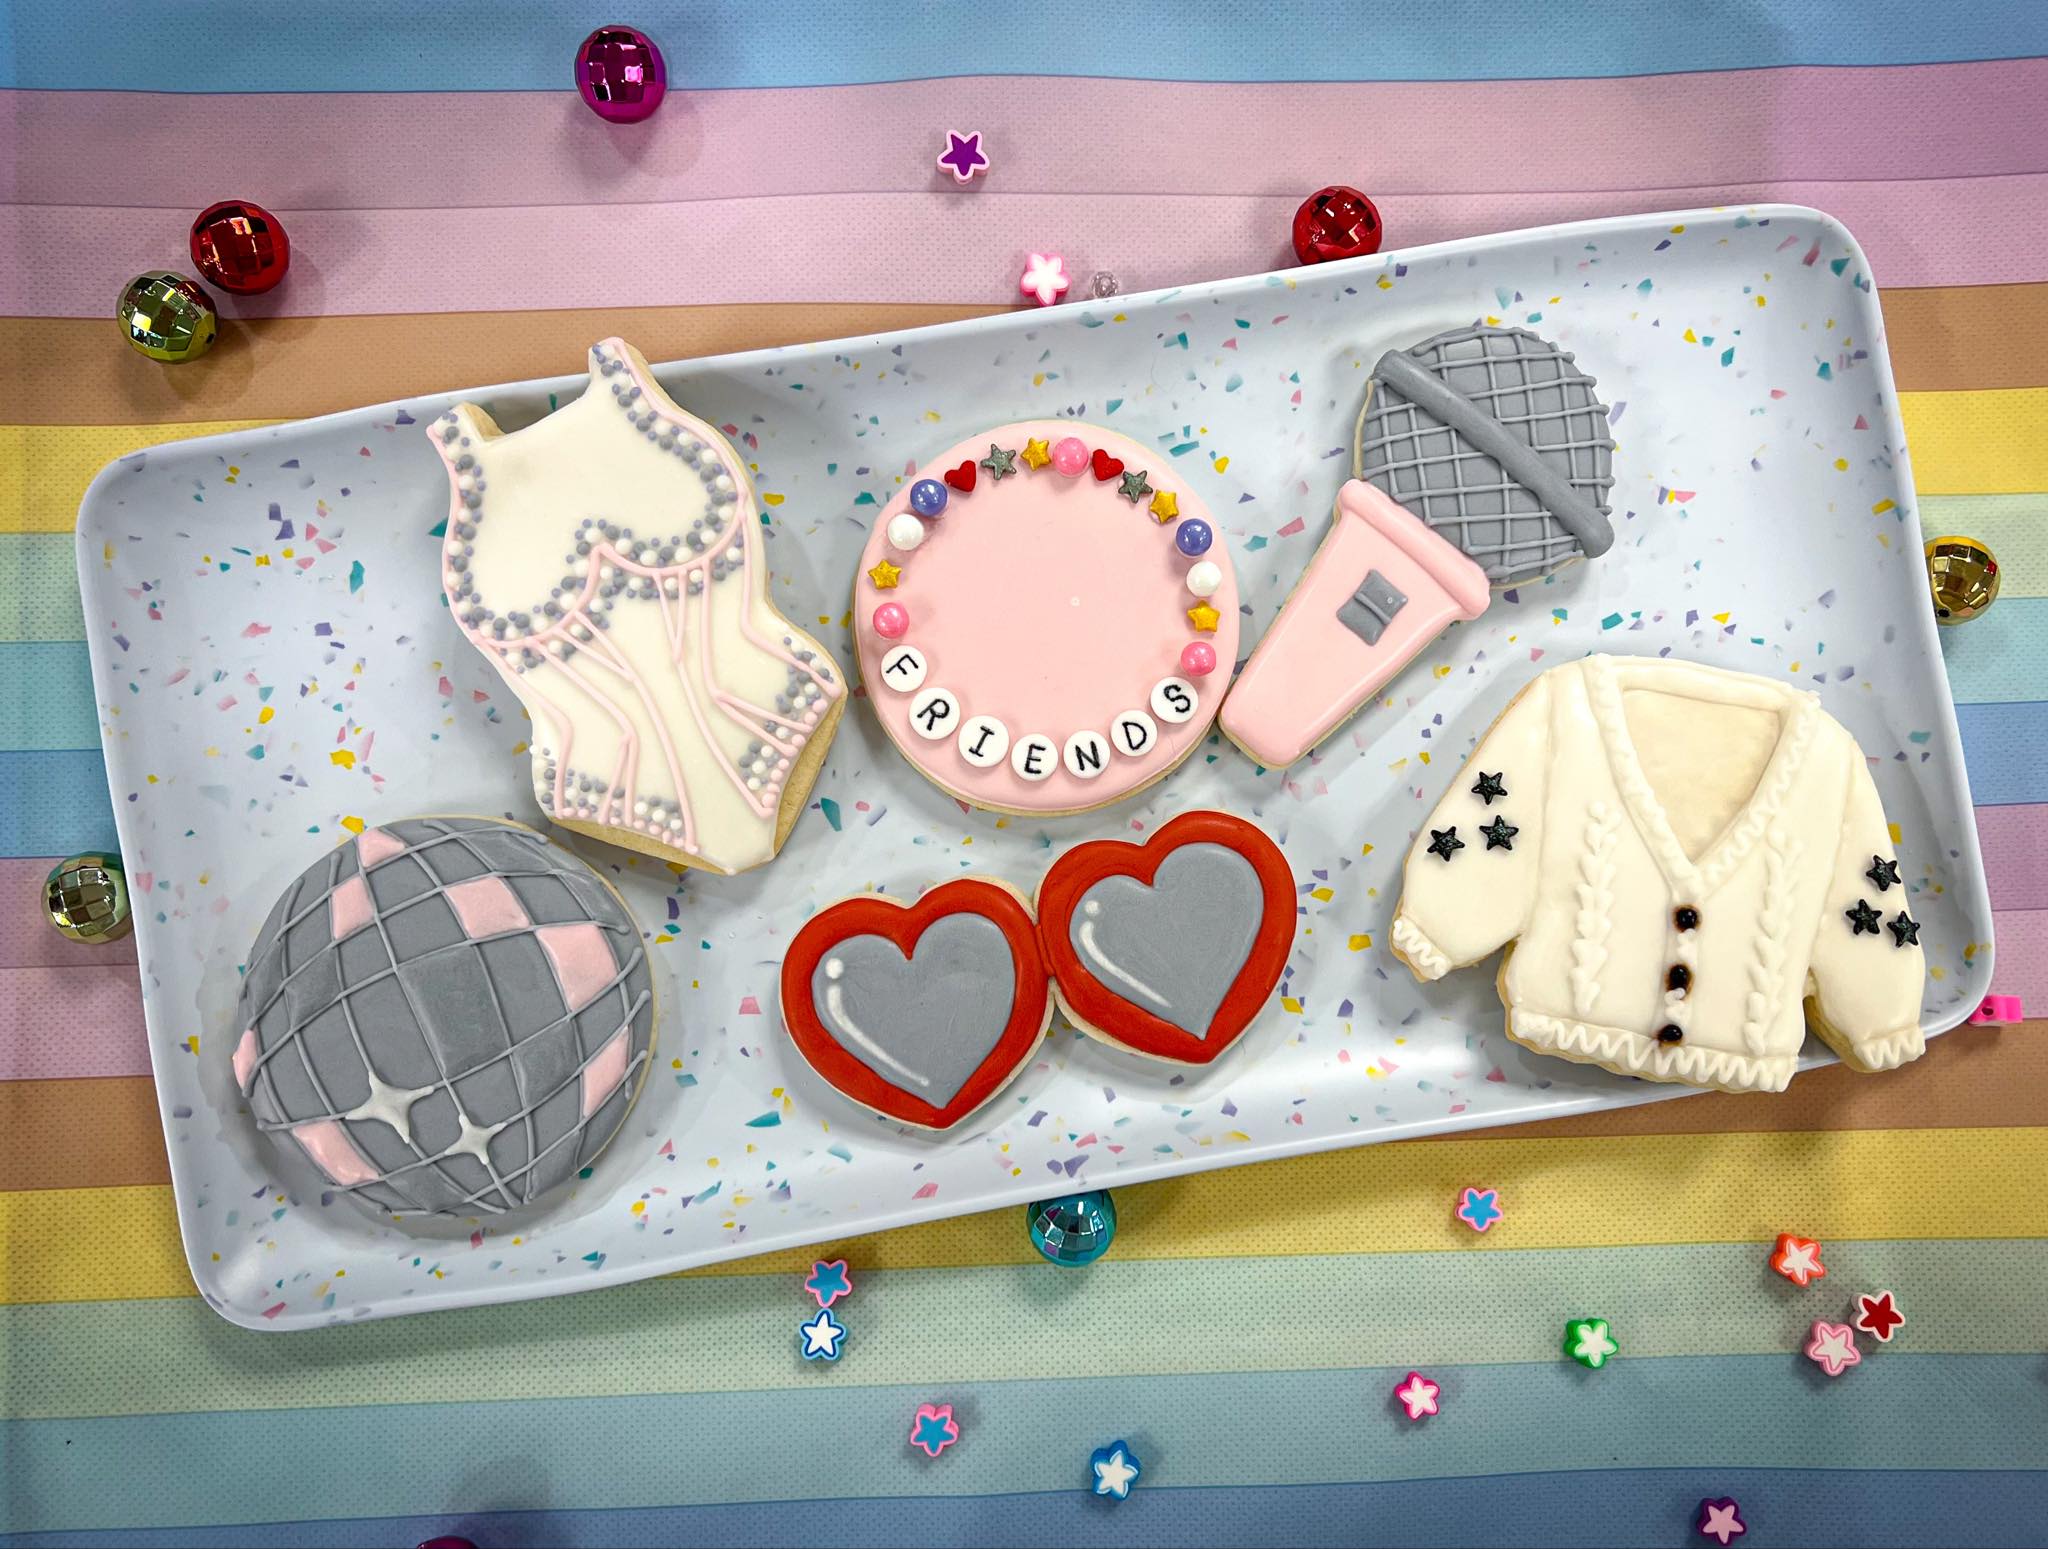 T. Swift Inspired Cookie Decorating with Sugar & Salt, A Coastal Bakery